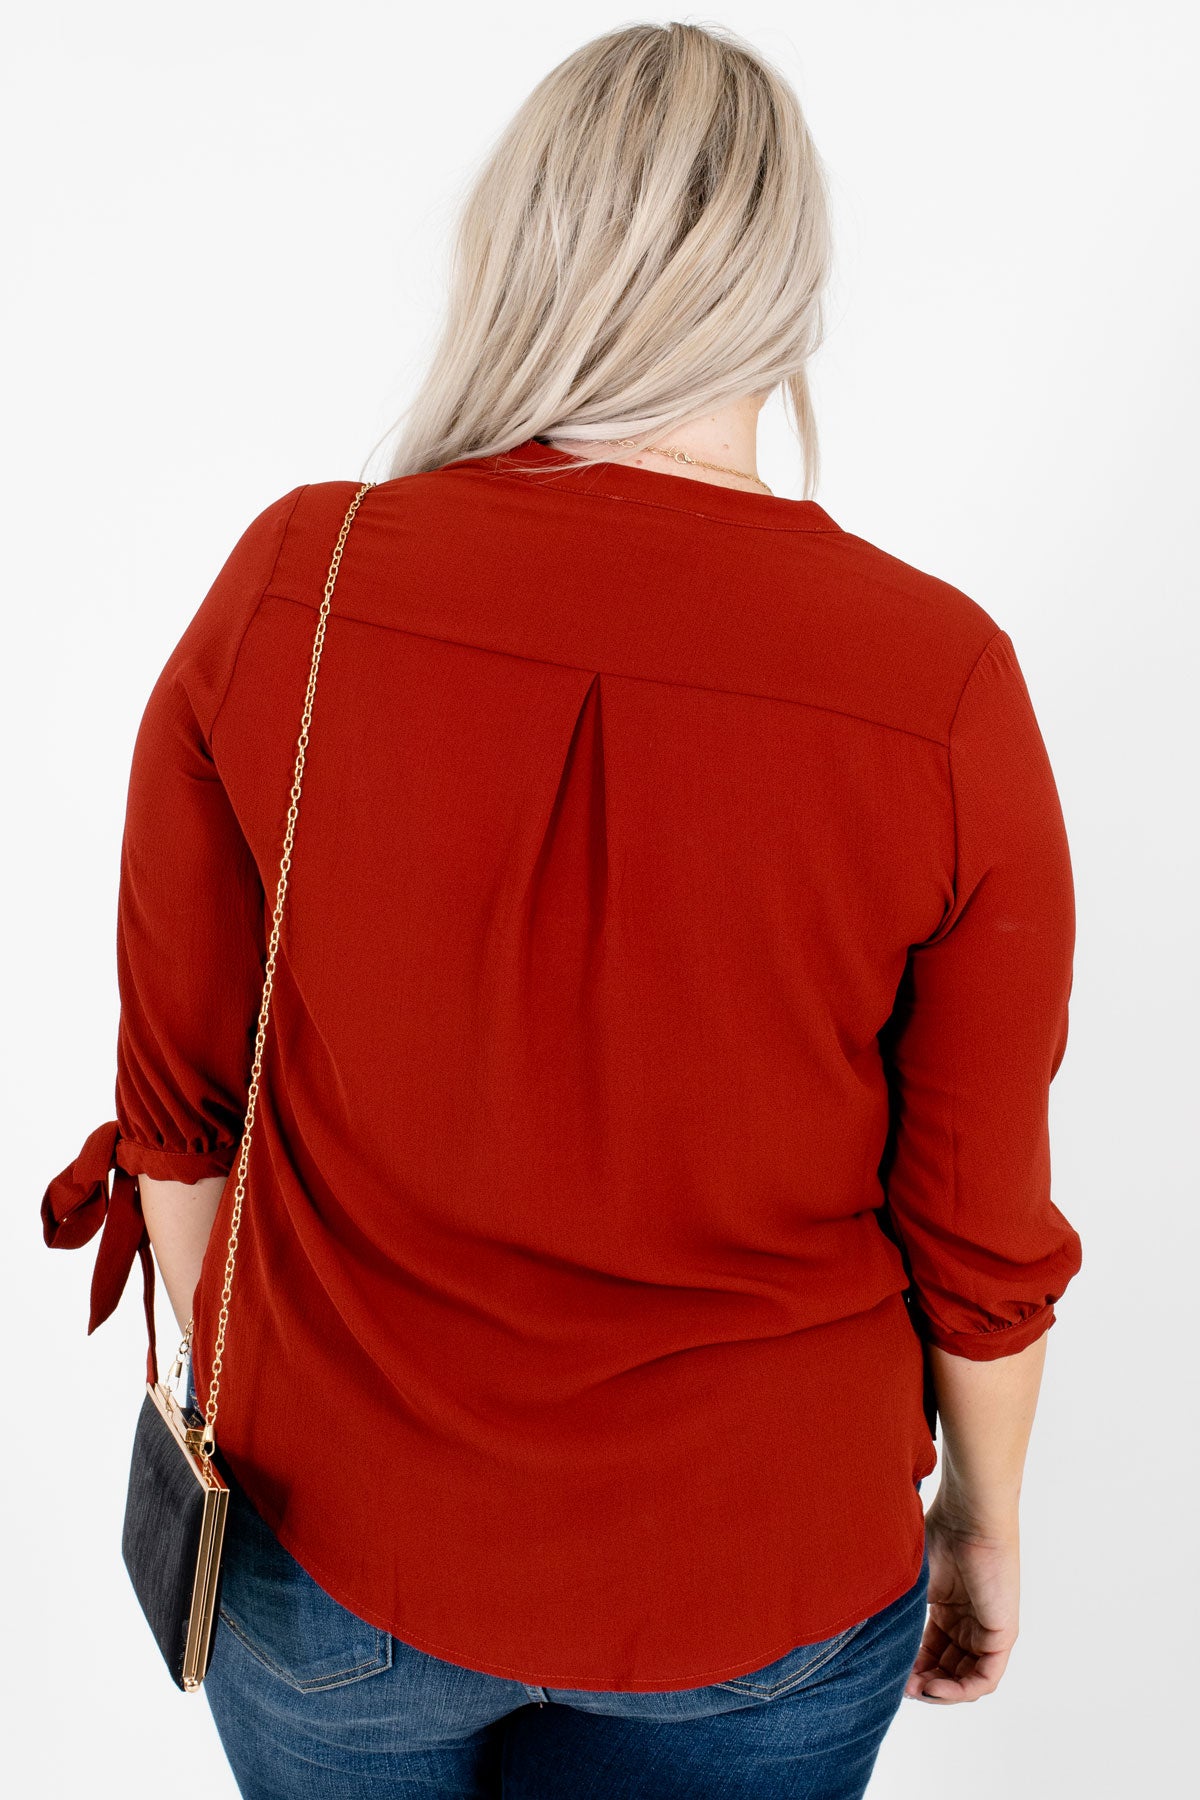 Women's Rust Red Self-Tie Sleeve Boutique Blouse